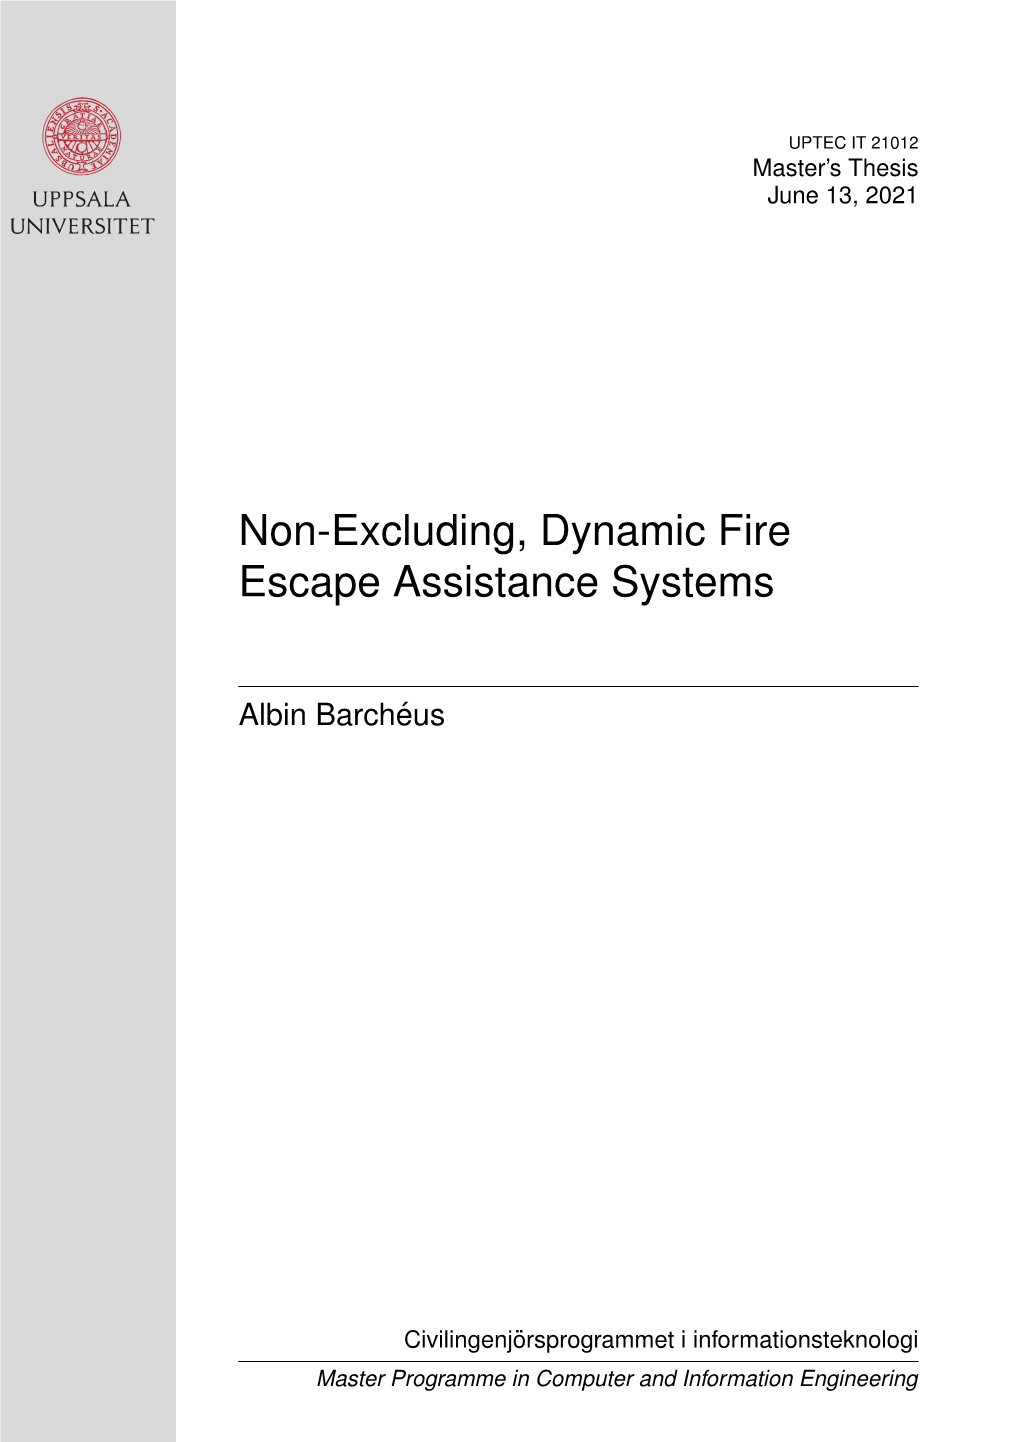 Non-Excluding, Dynamic Fire Escape Assistance Systems